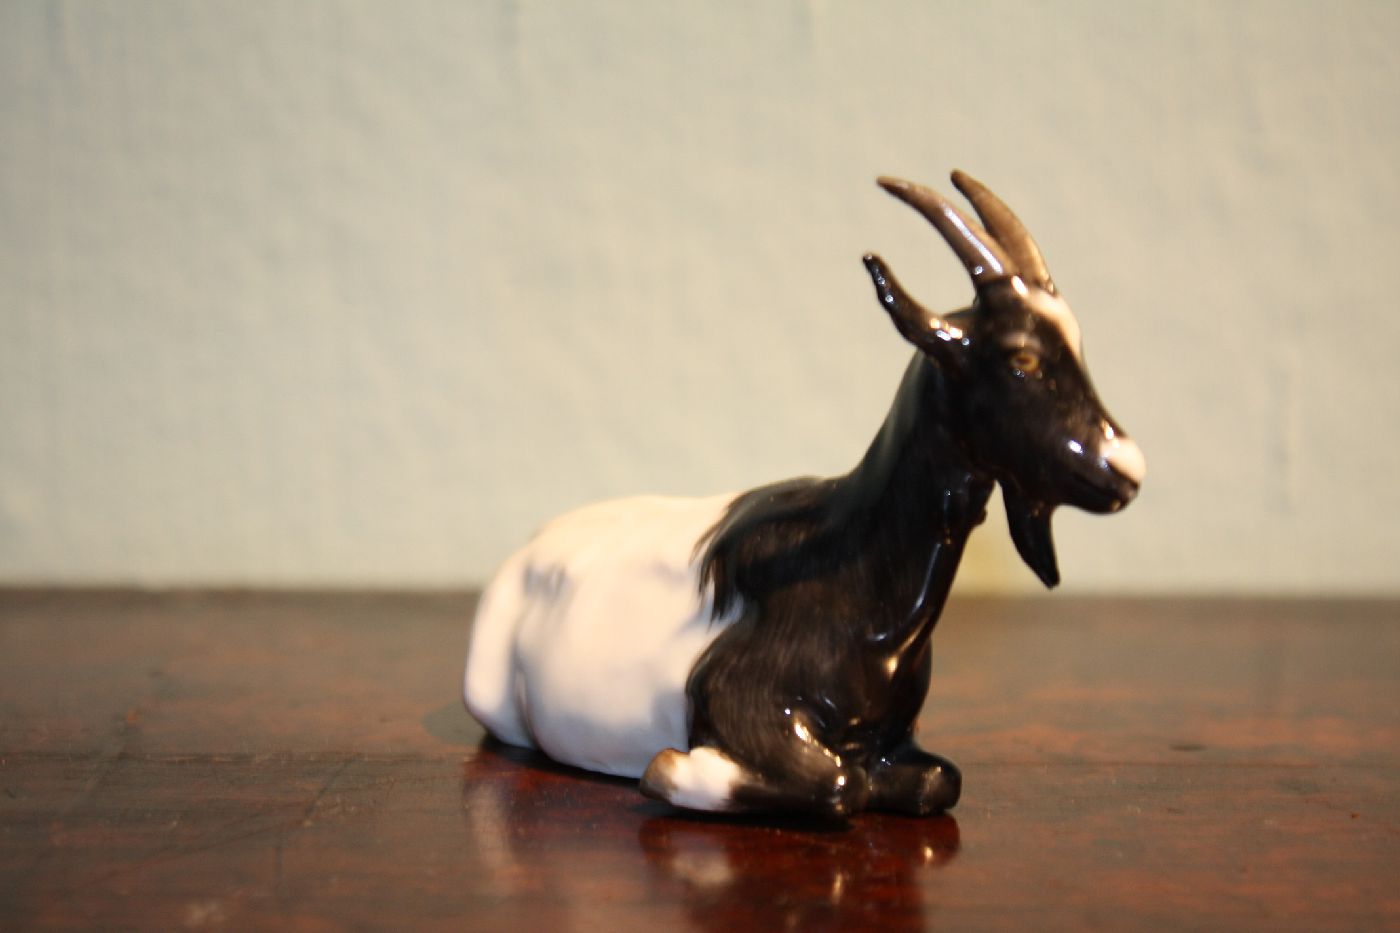 A very small vintage antique 1900 hand-painted Meissen porcelain figurine mountain goat